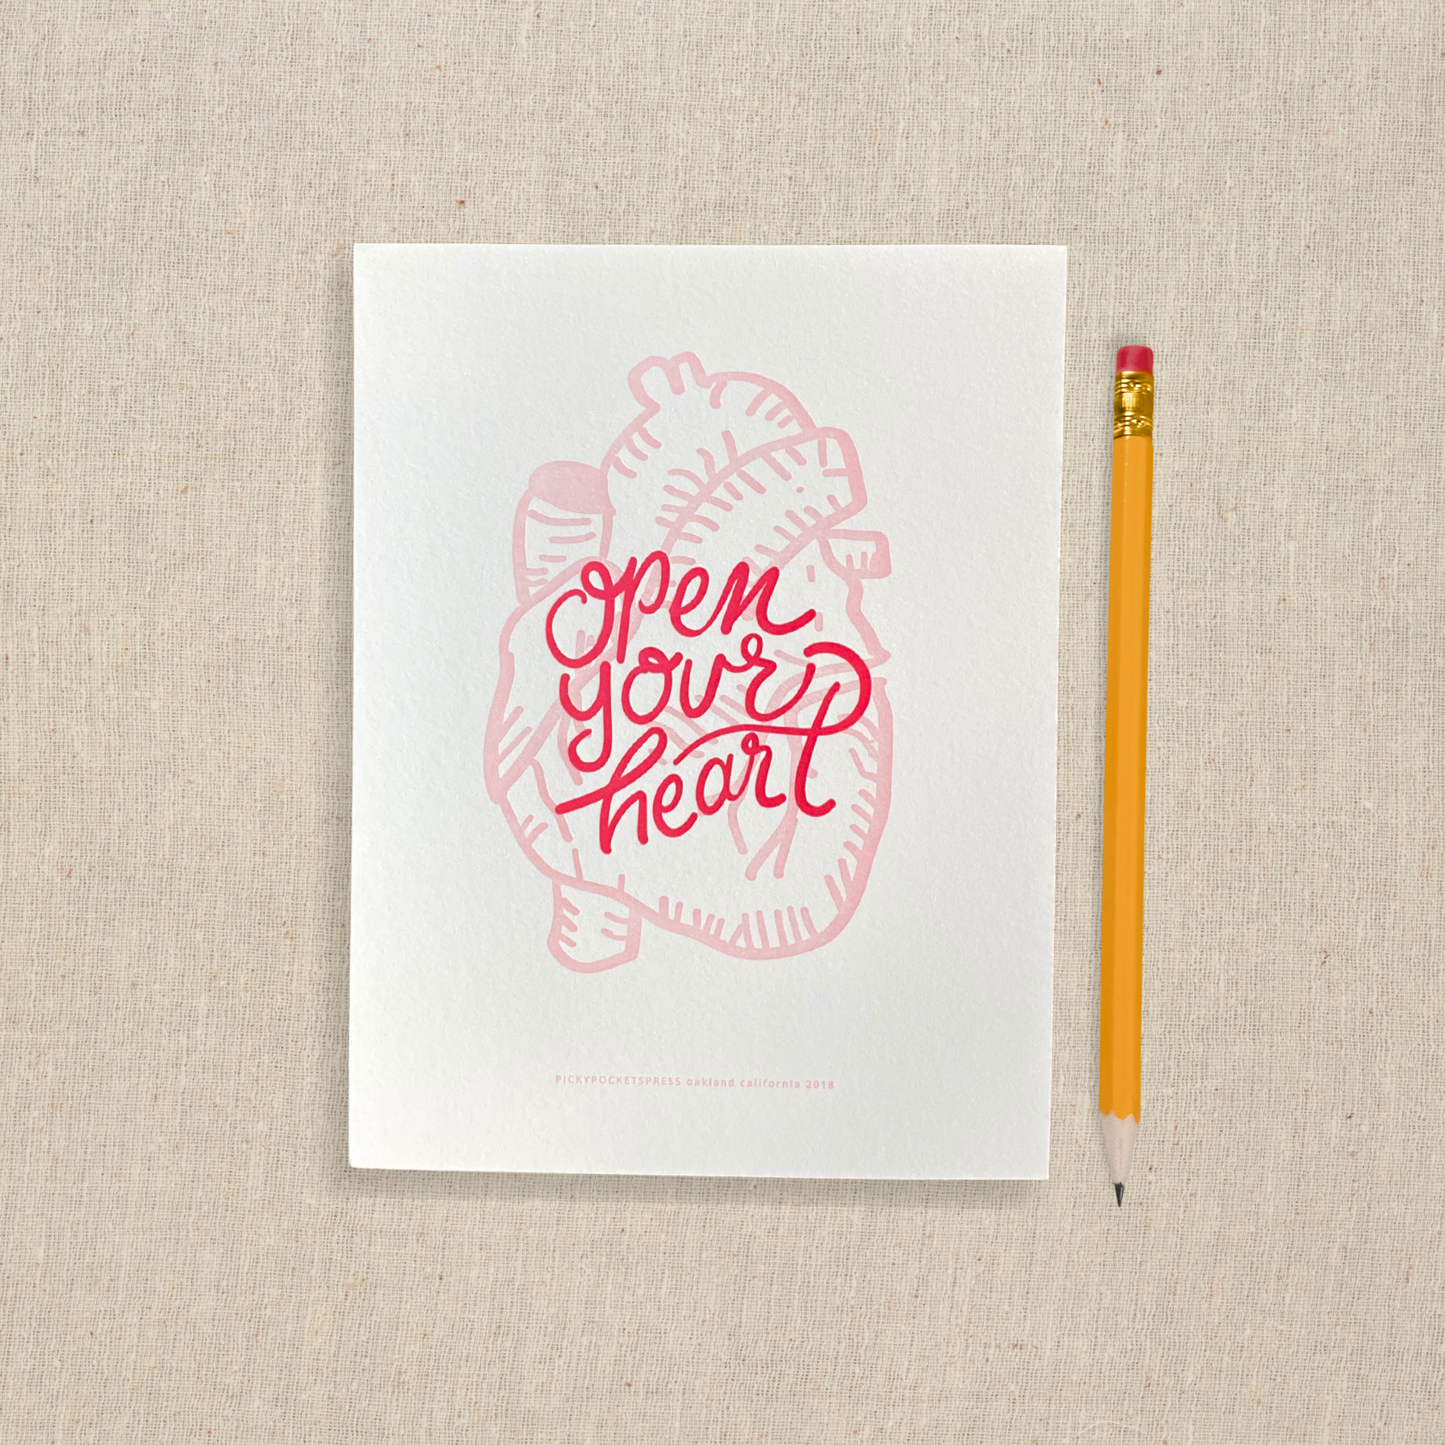 5 x 7 letterpress print with pink anatomical heart one drawing and red lettering that says open your heart 